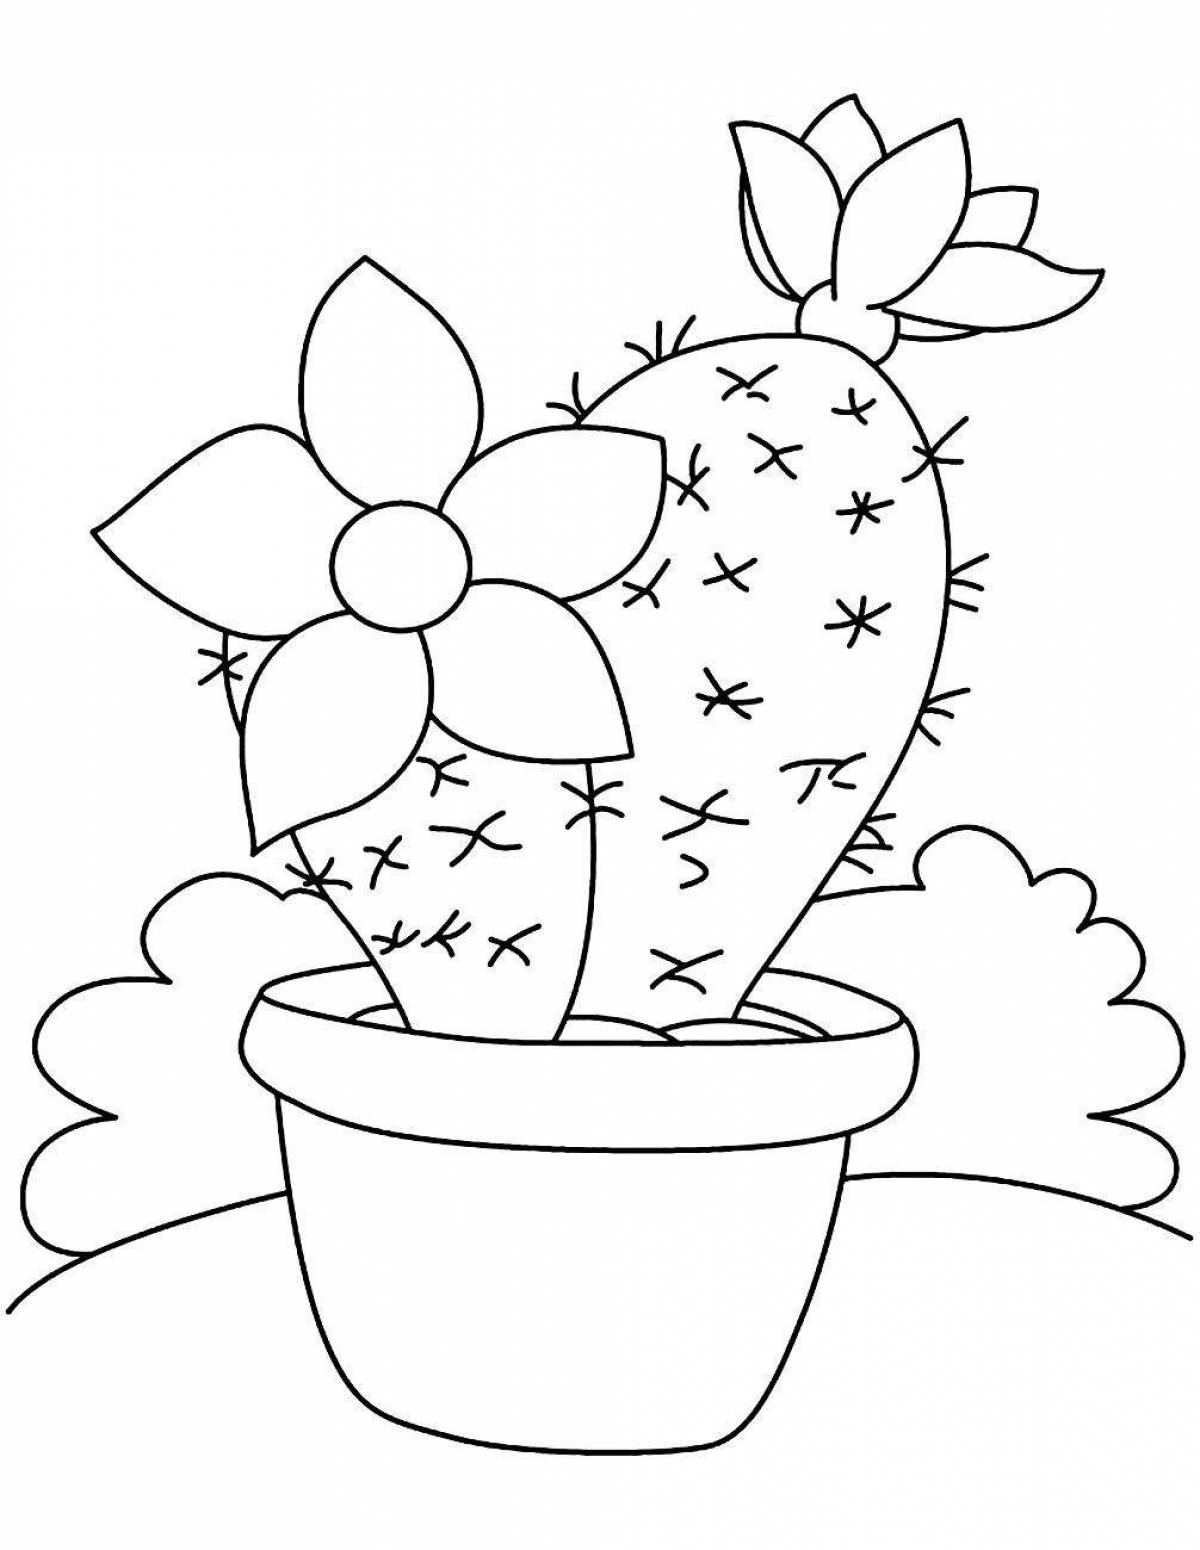 Shimmering flowerpot coloring page